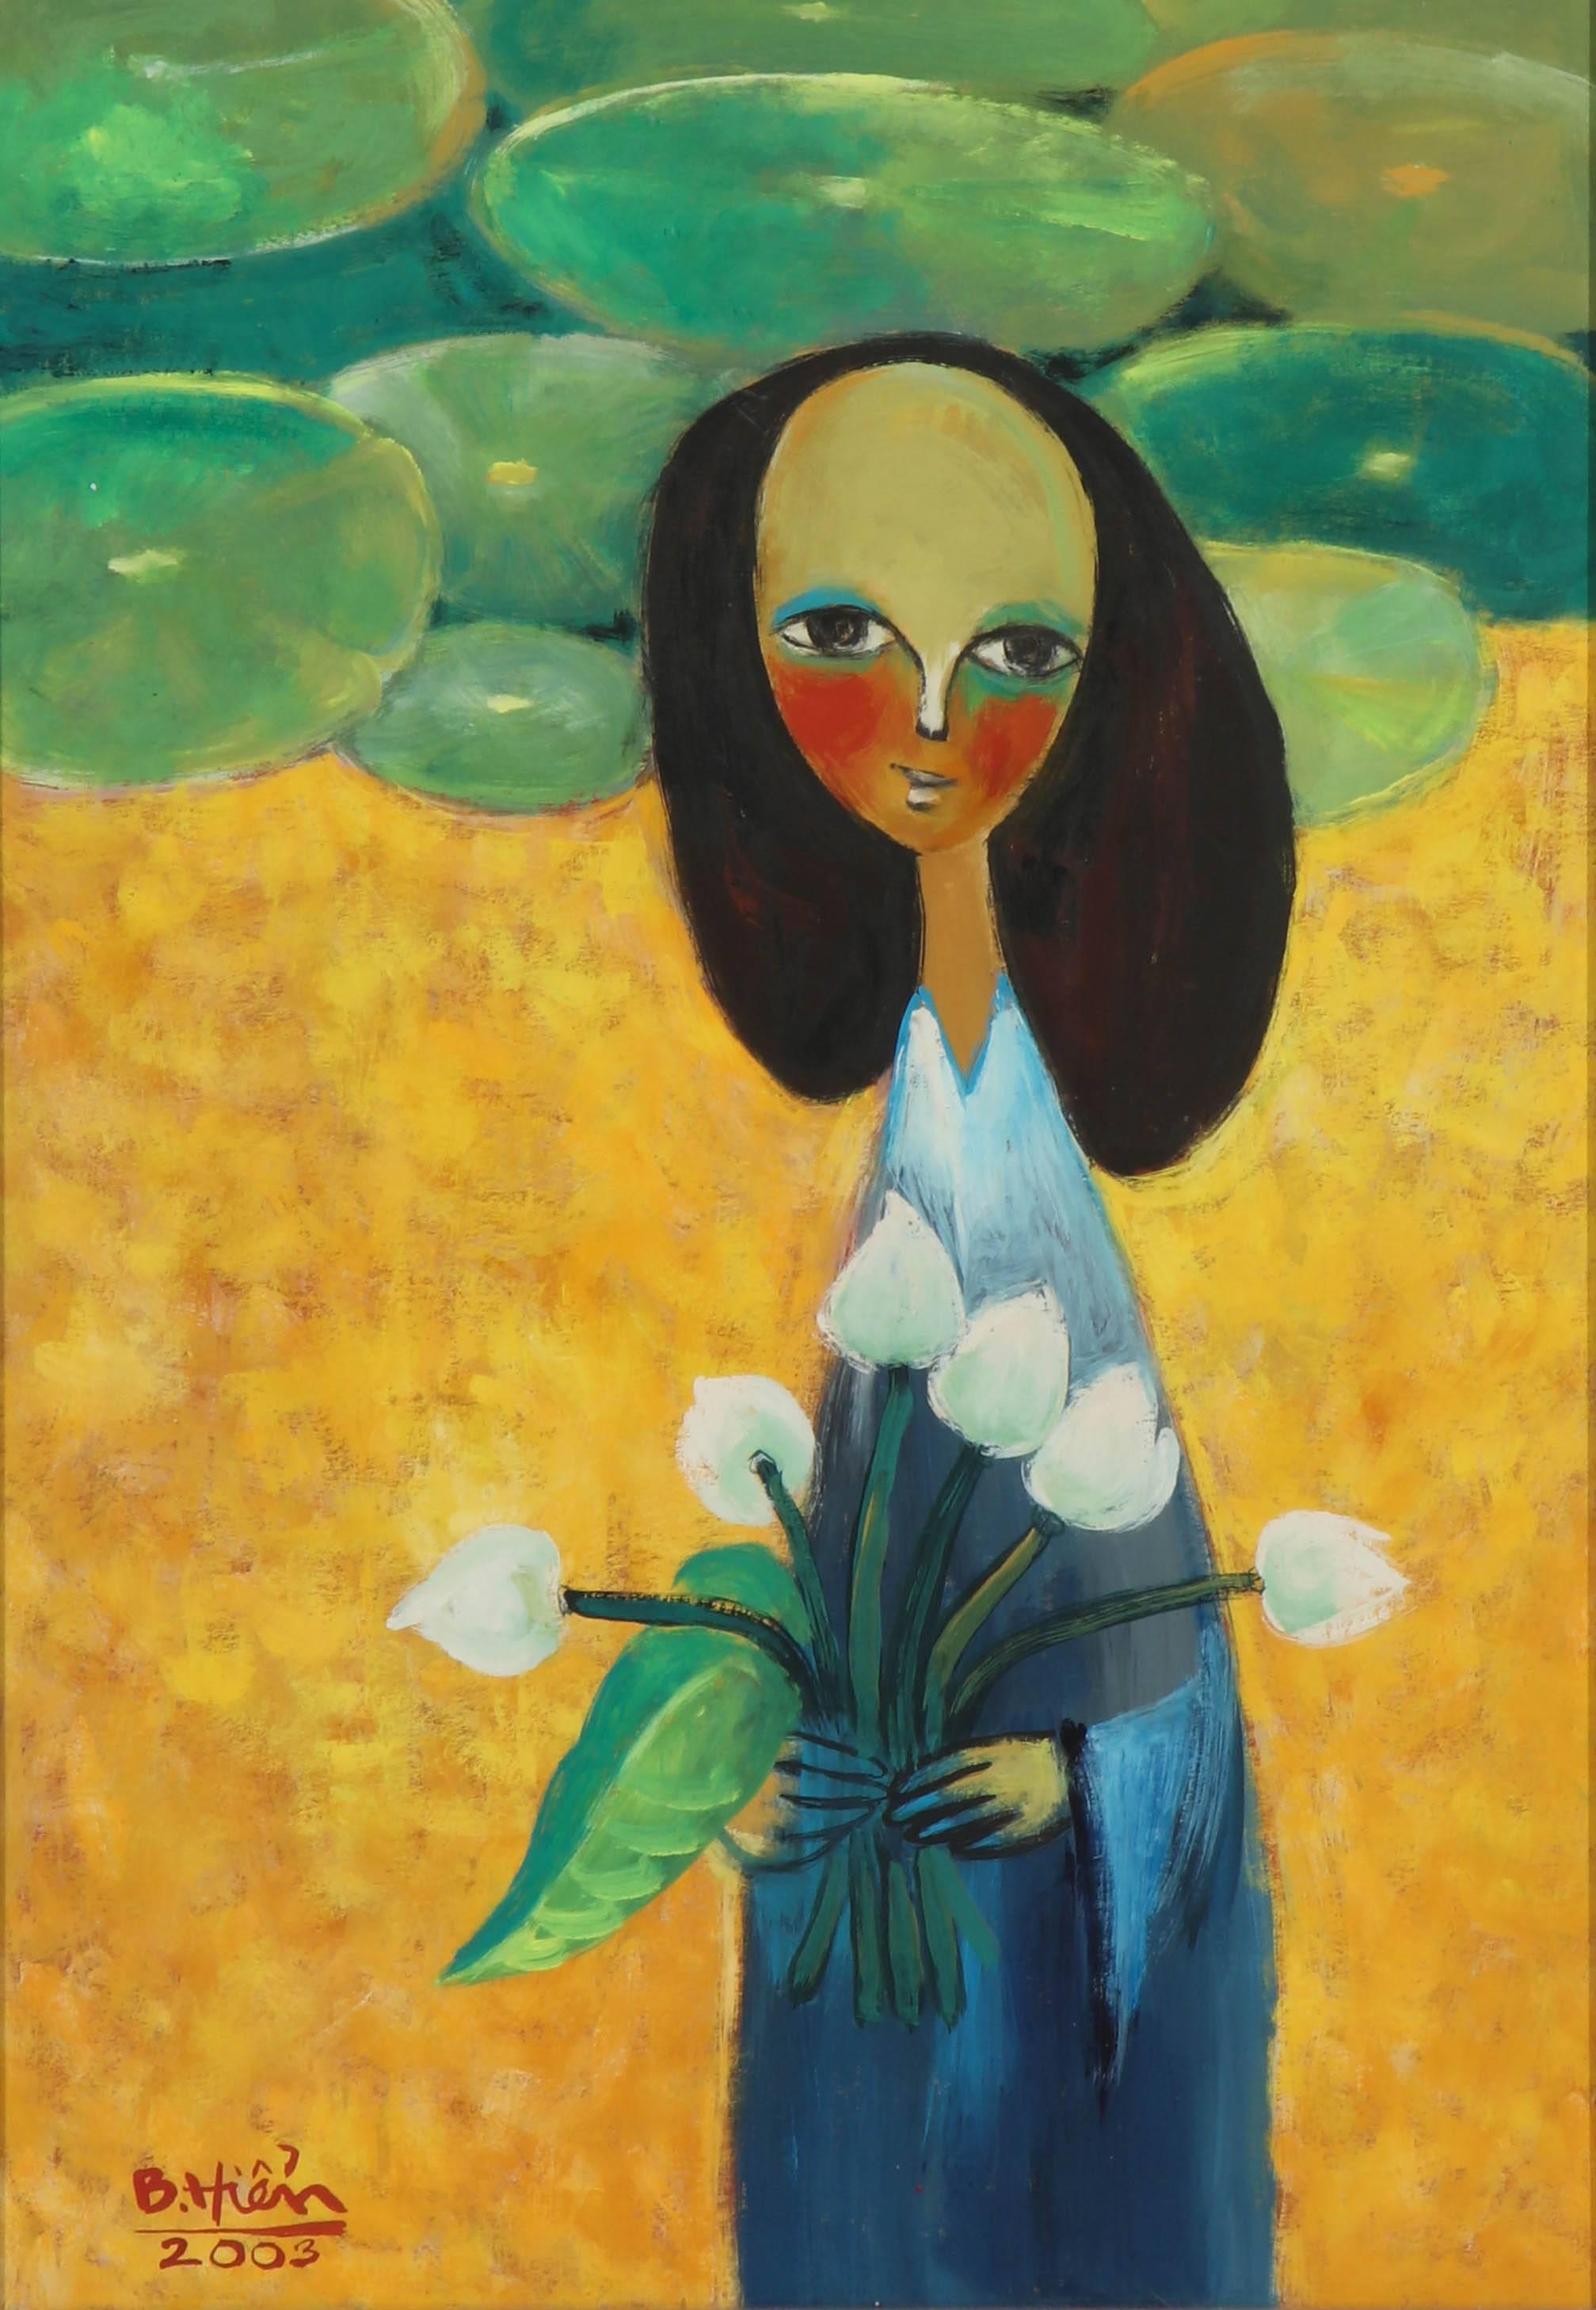 Lady with water lilies. Contemporary painting by an artist from Hanoi, Viet Nam, 2003. Singed painting by Bitten. The painting comes with a beautiful silver frame.